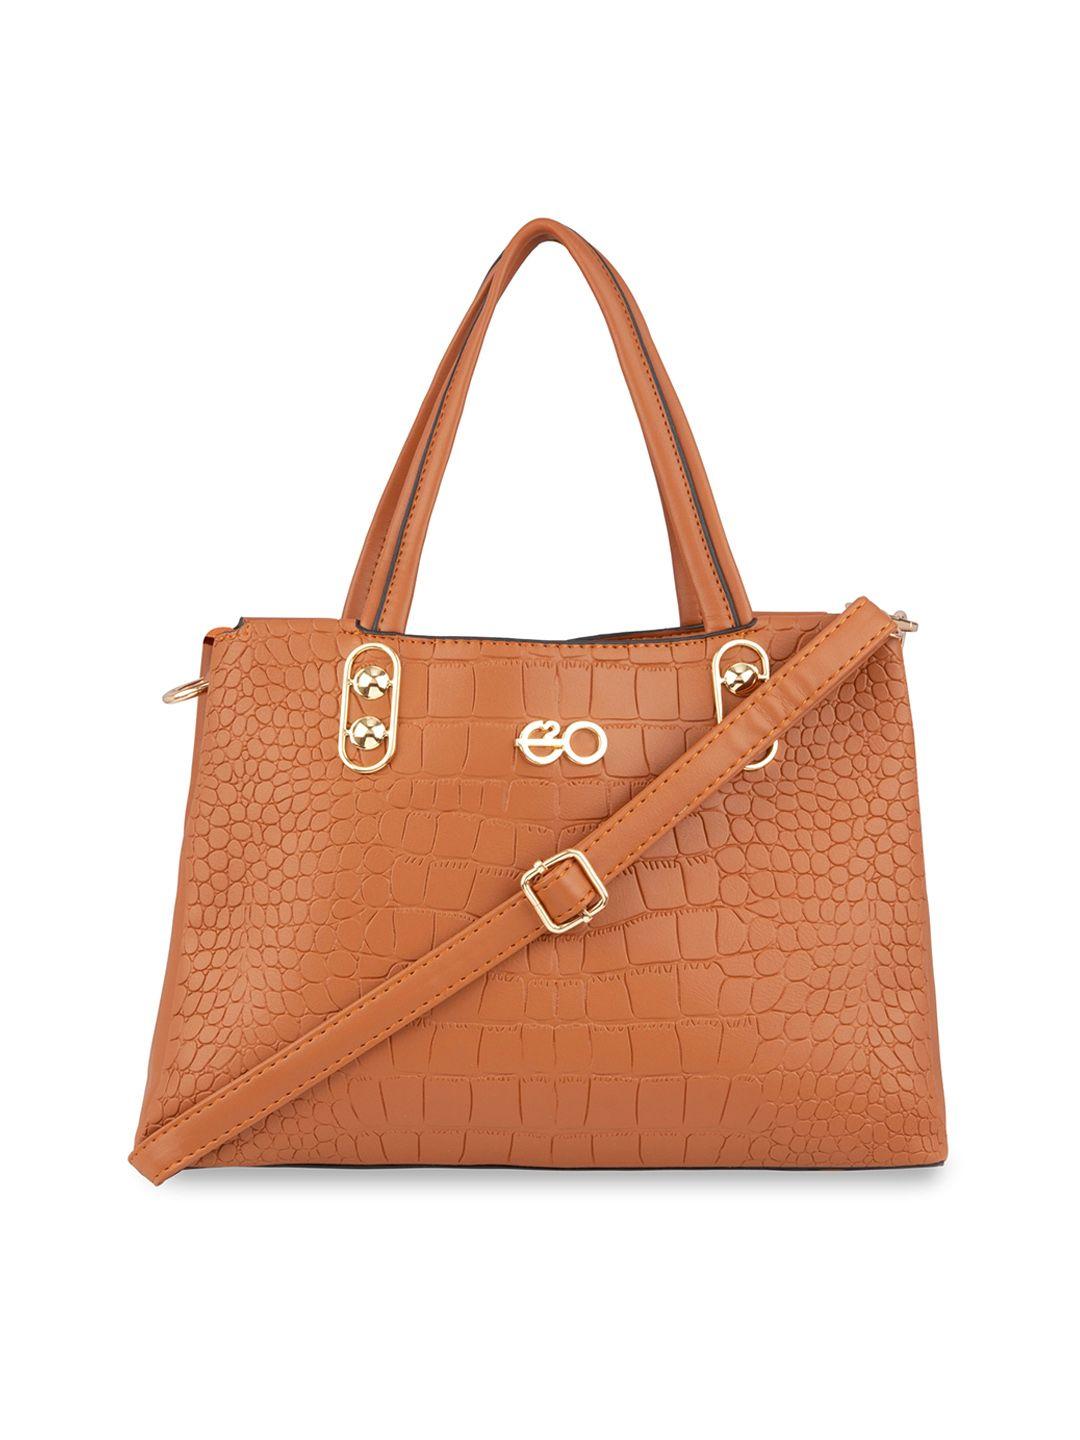 e2o orange textured pu shopper handheld bag with quilted